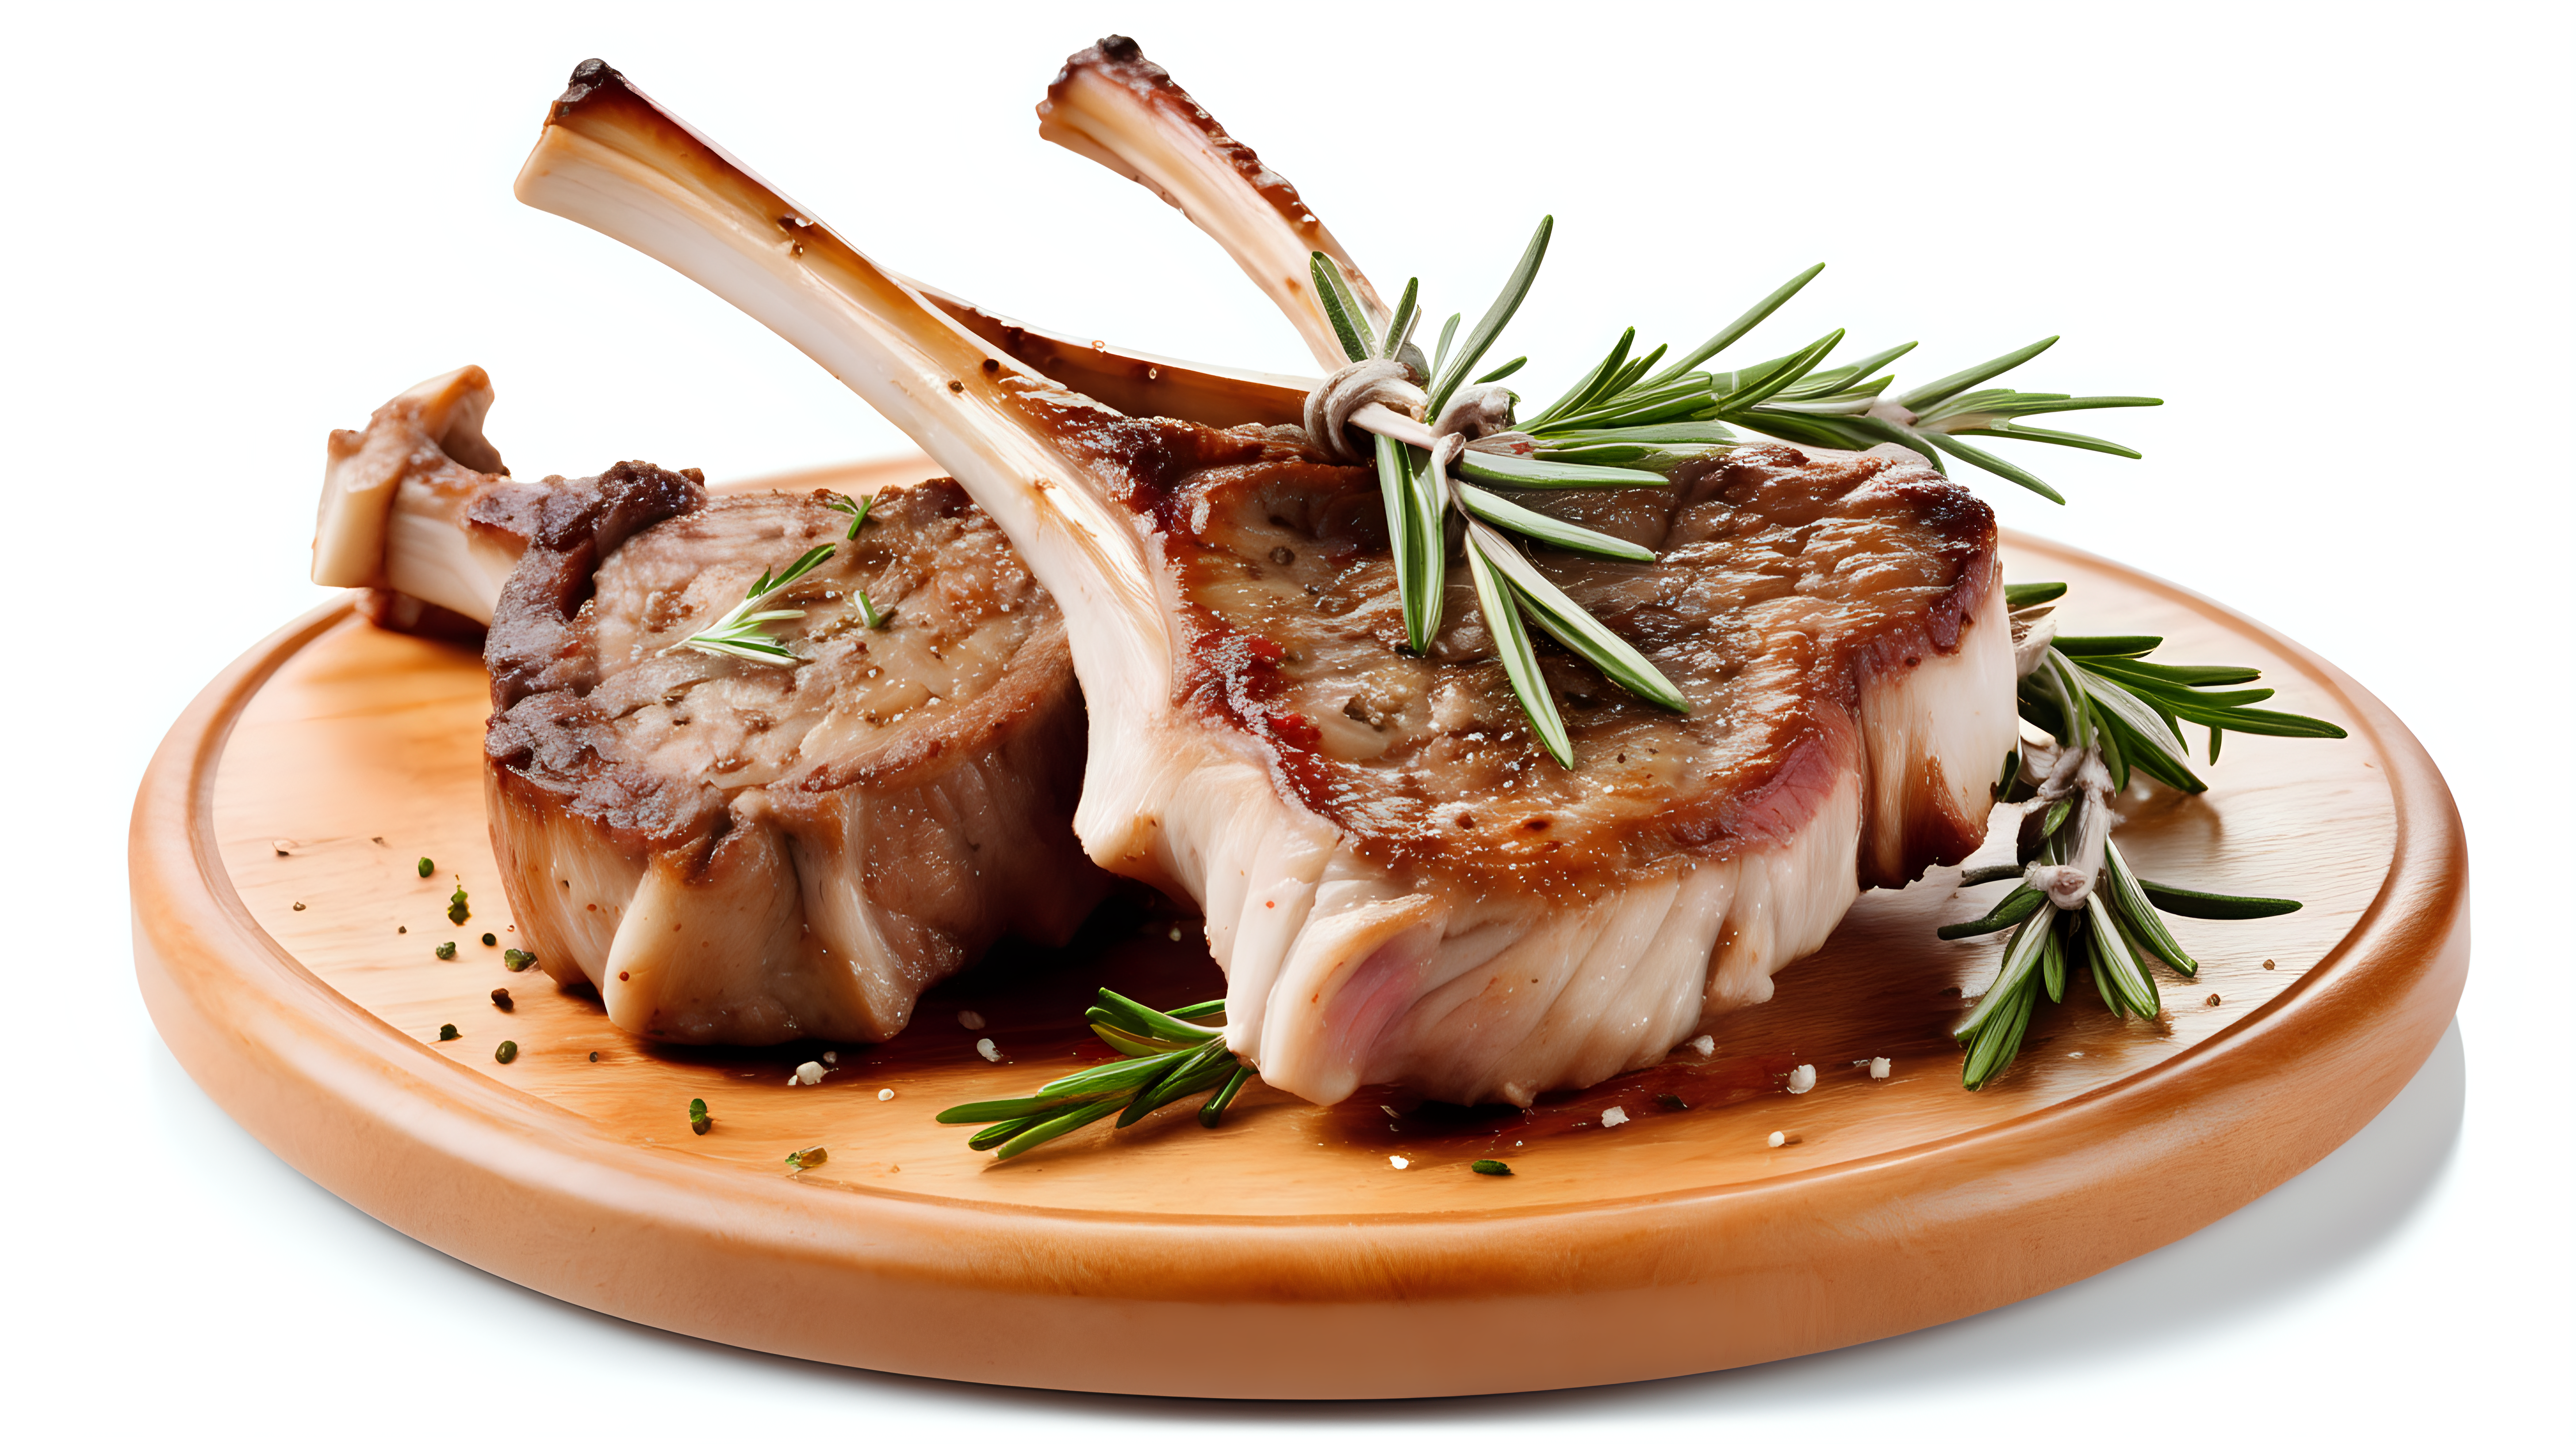 lamb chop with rosemary on wooden plate, isolated on white background